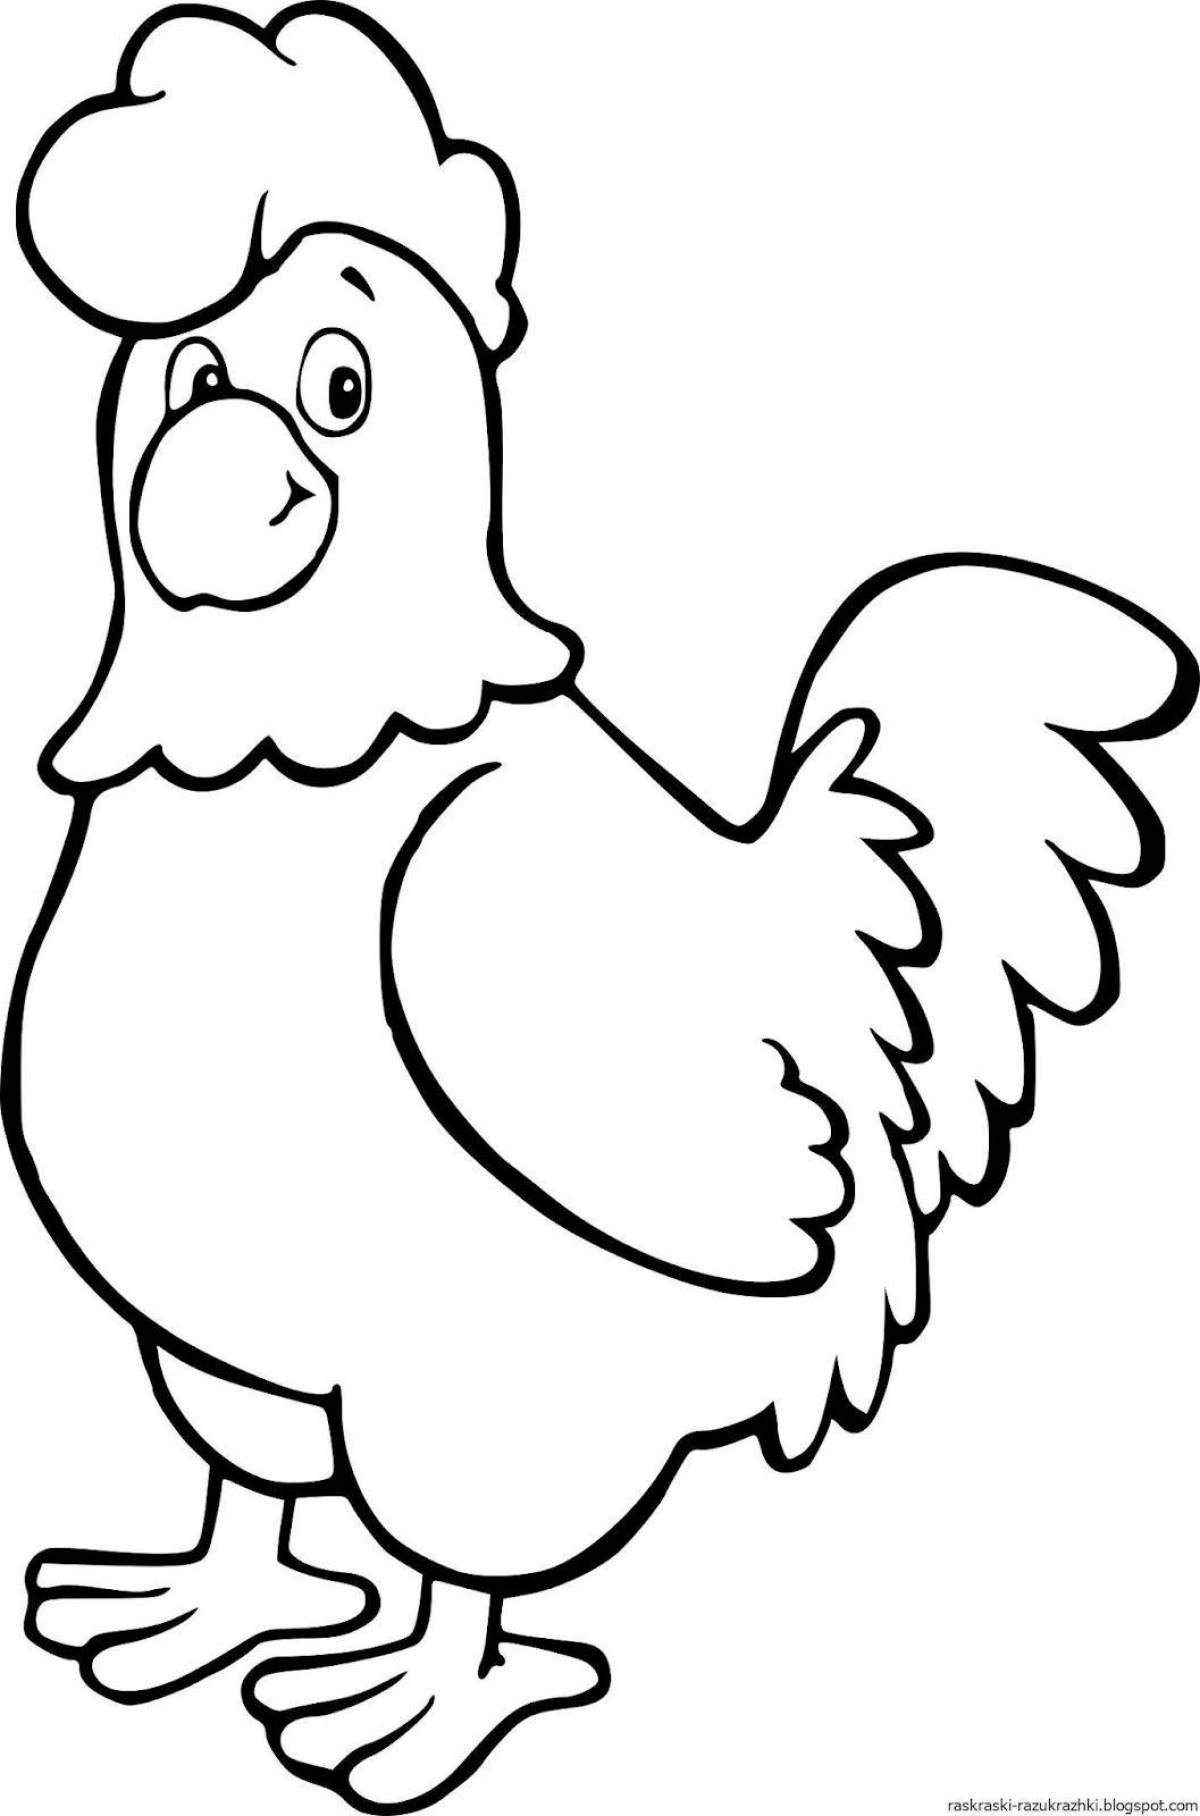 Chicken coloring book for babies 2-3 years old